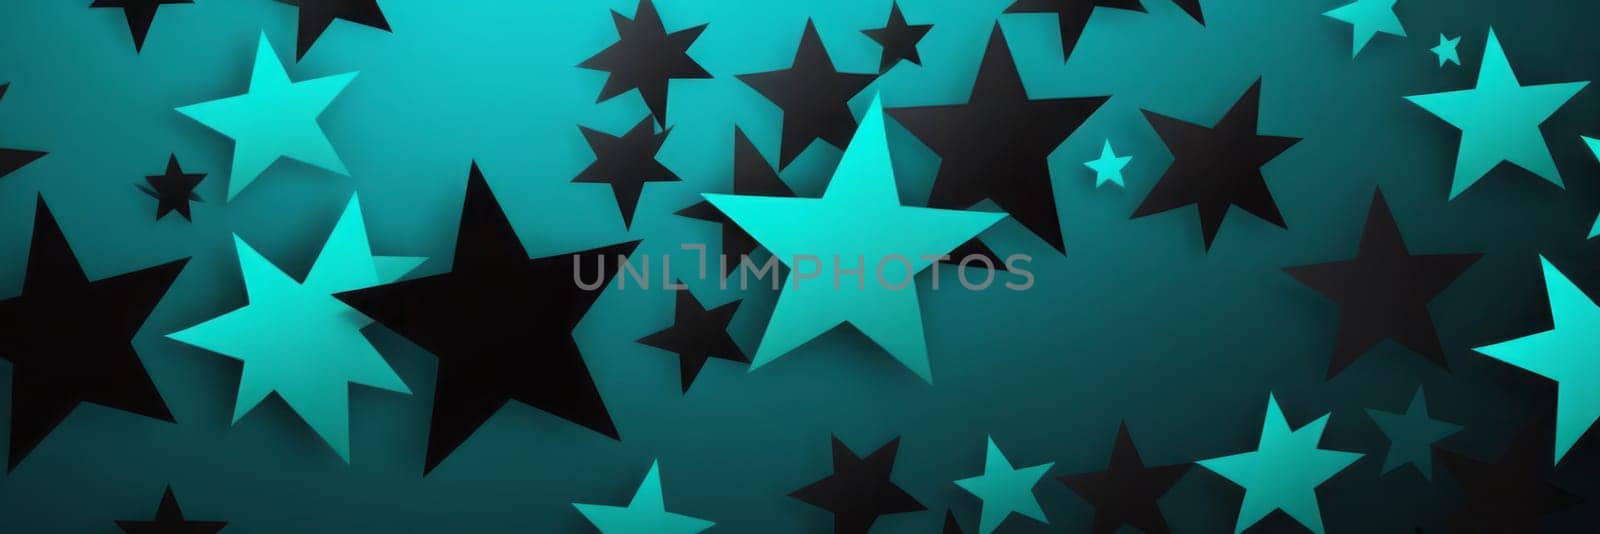 Star Shapes in Black and Teal by nkotlyar